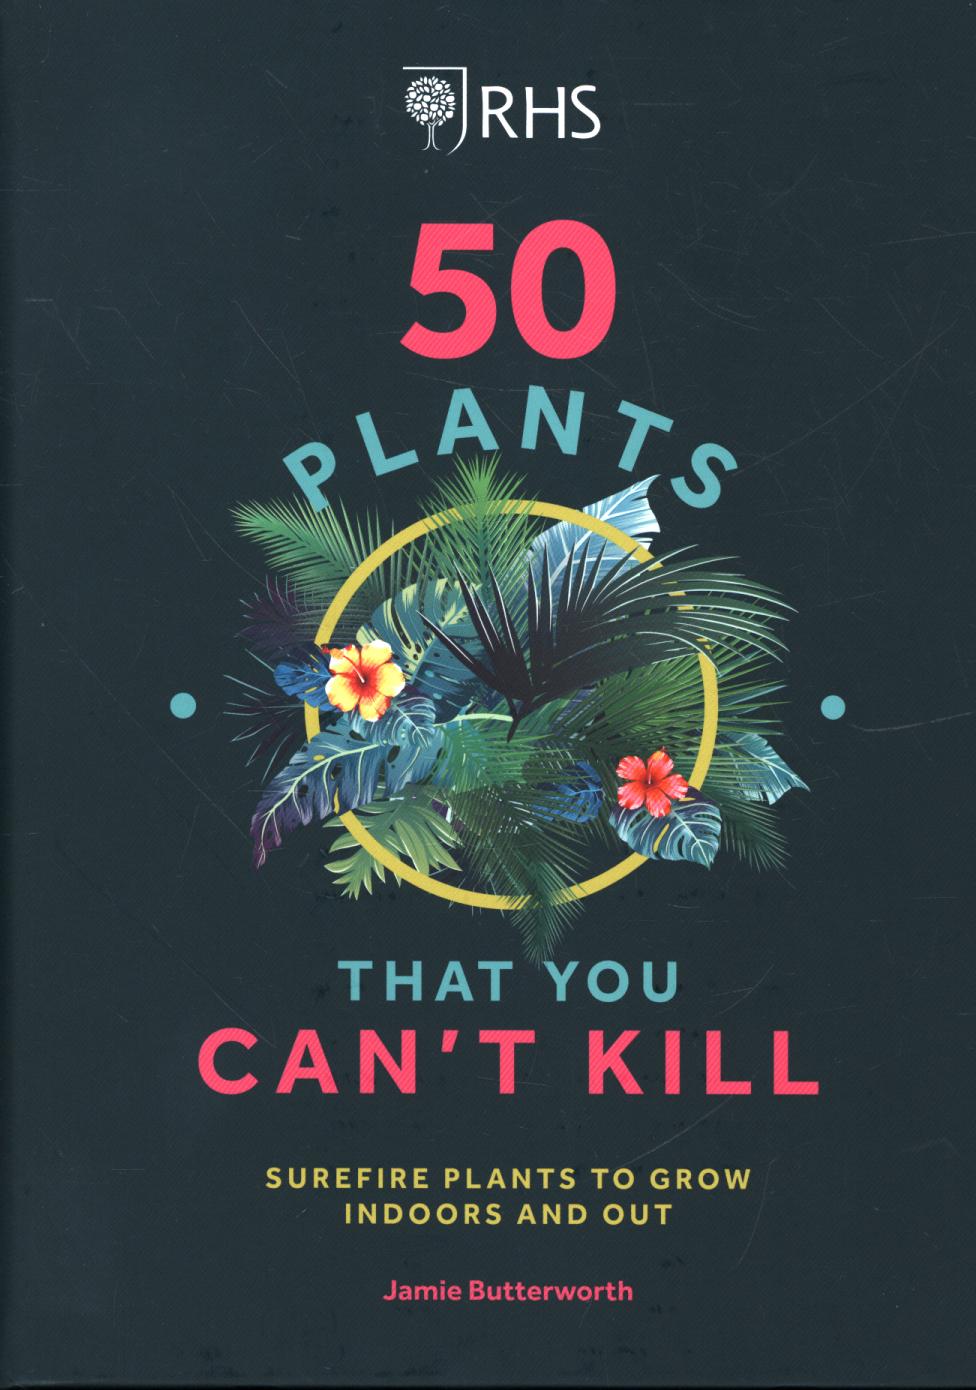 RHS 50 Plants You Can't Kill